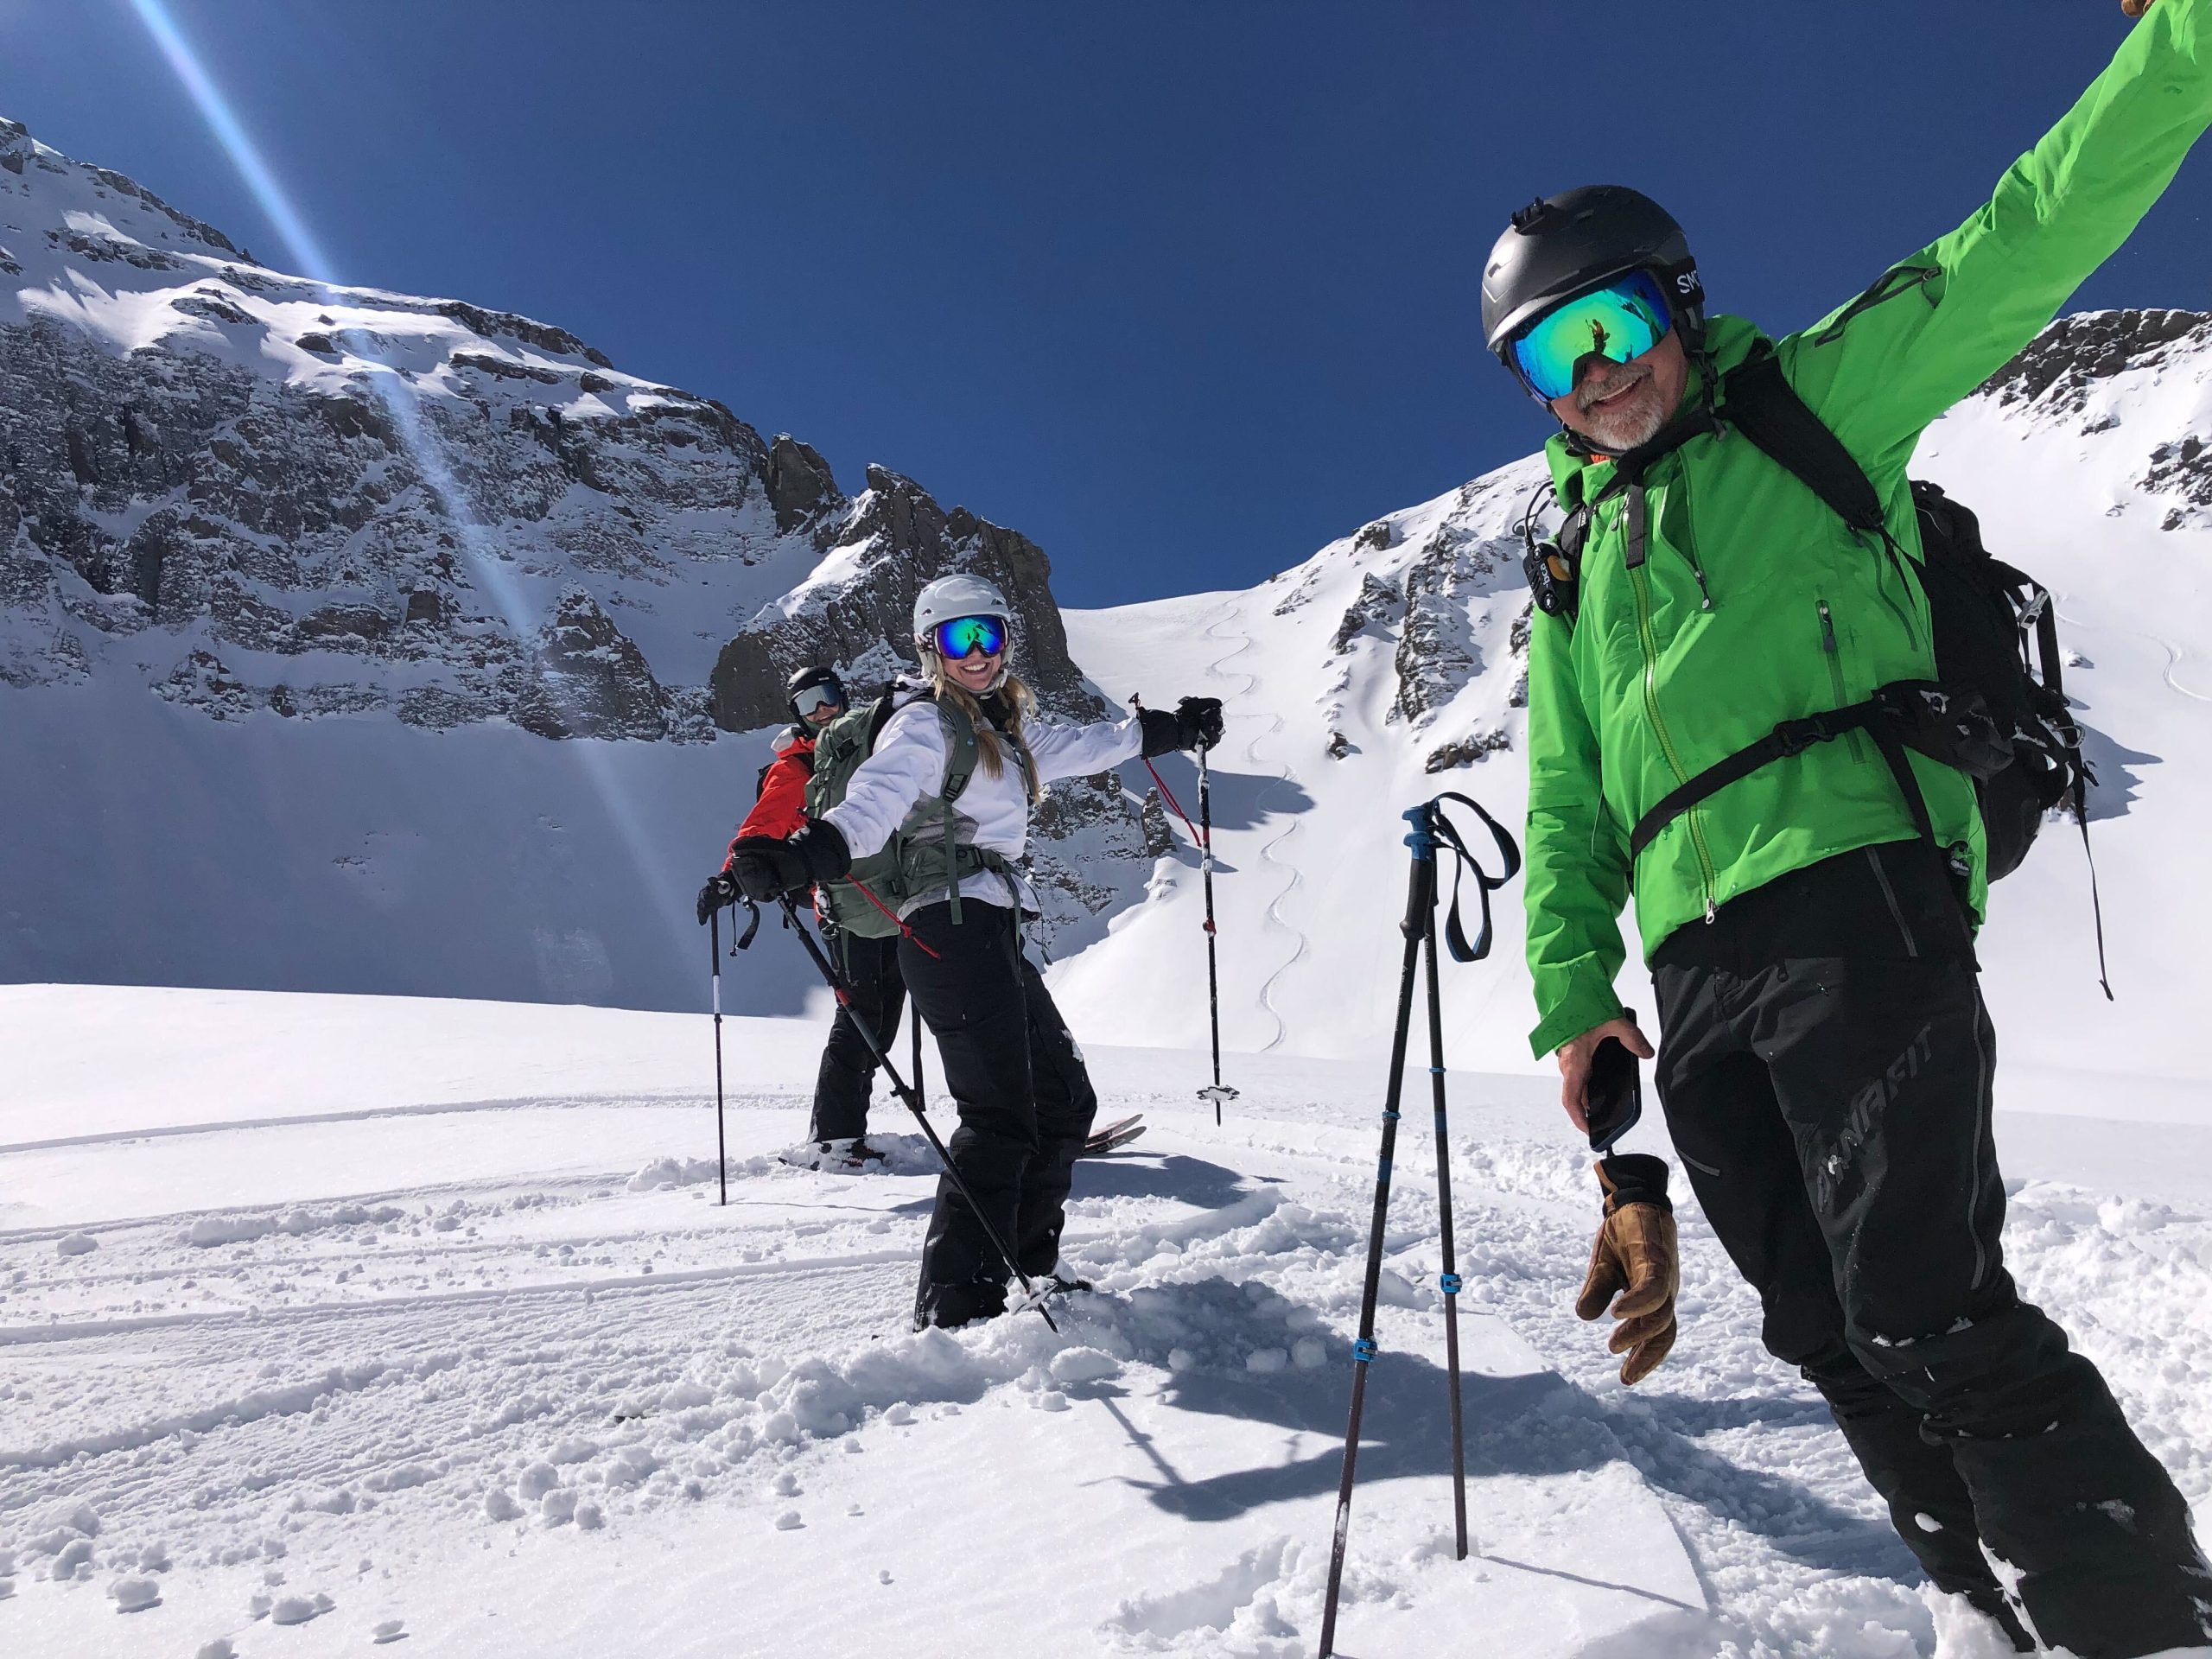 Backcountry Skiing and Snowboarding Gear Checklist, Visit Durango, CO